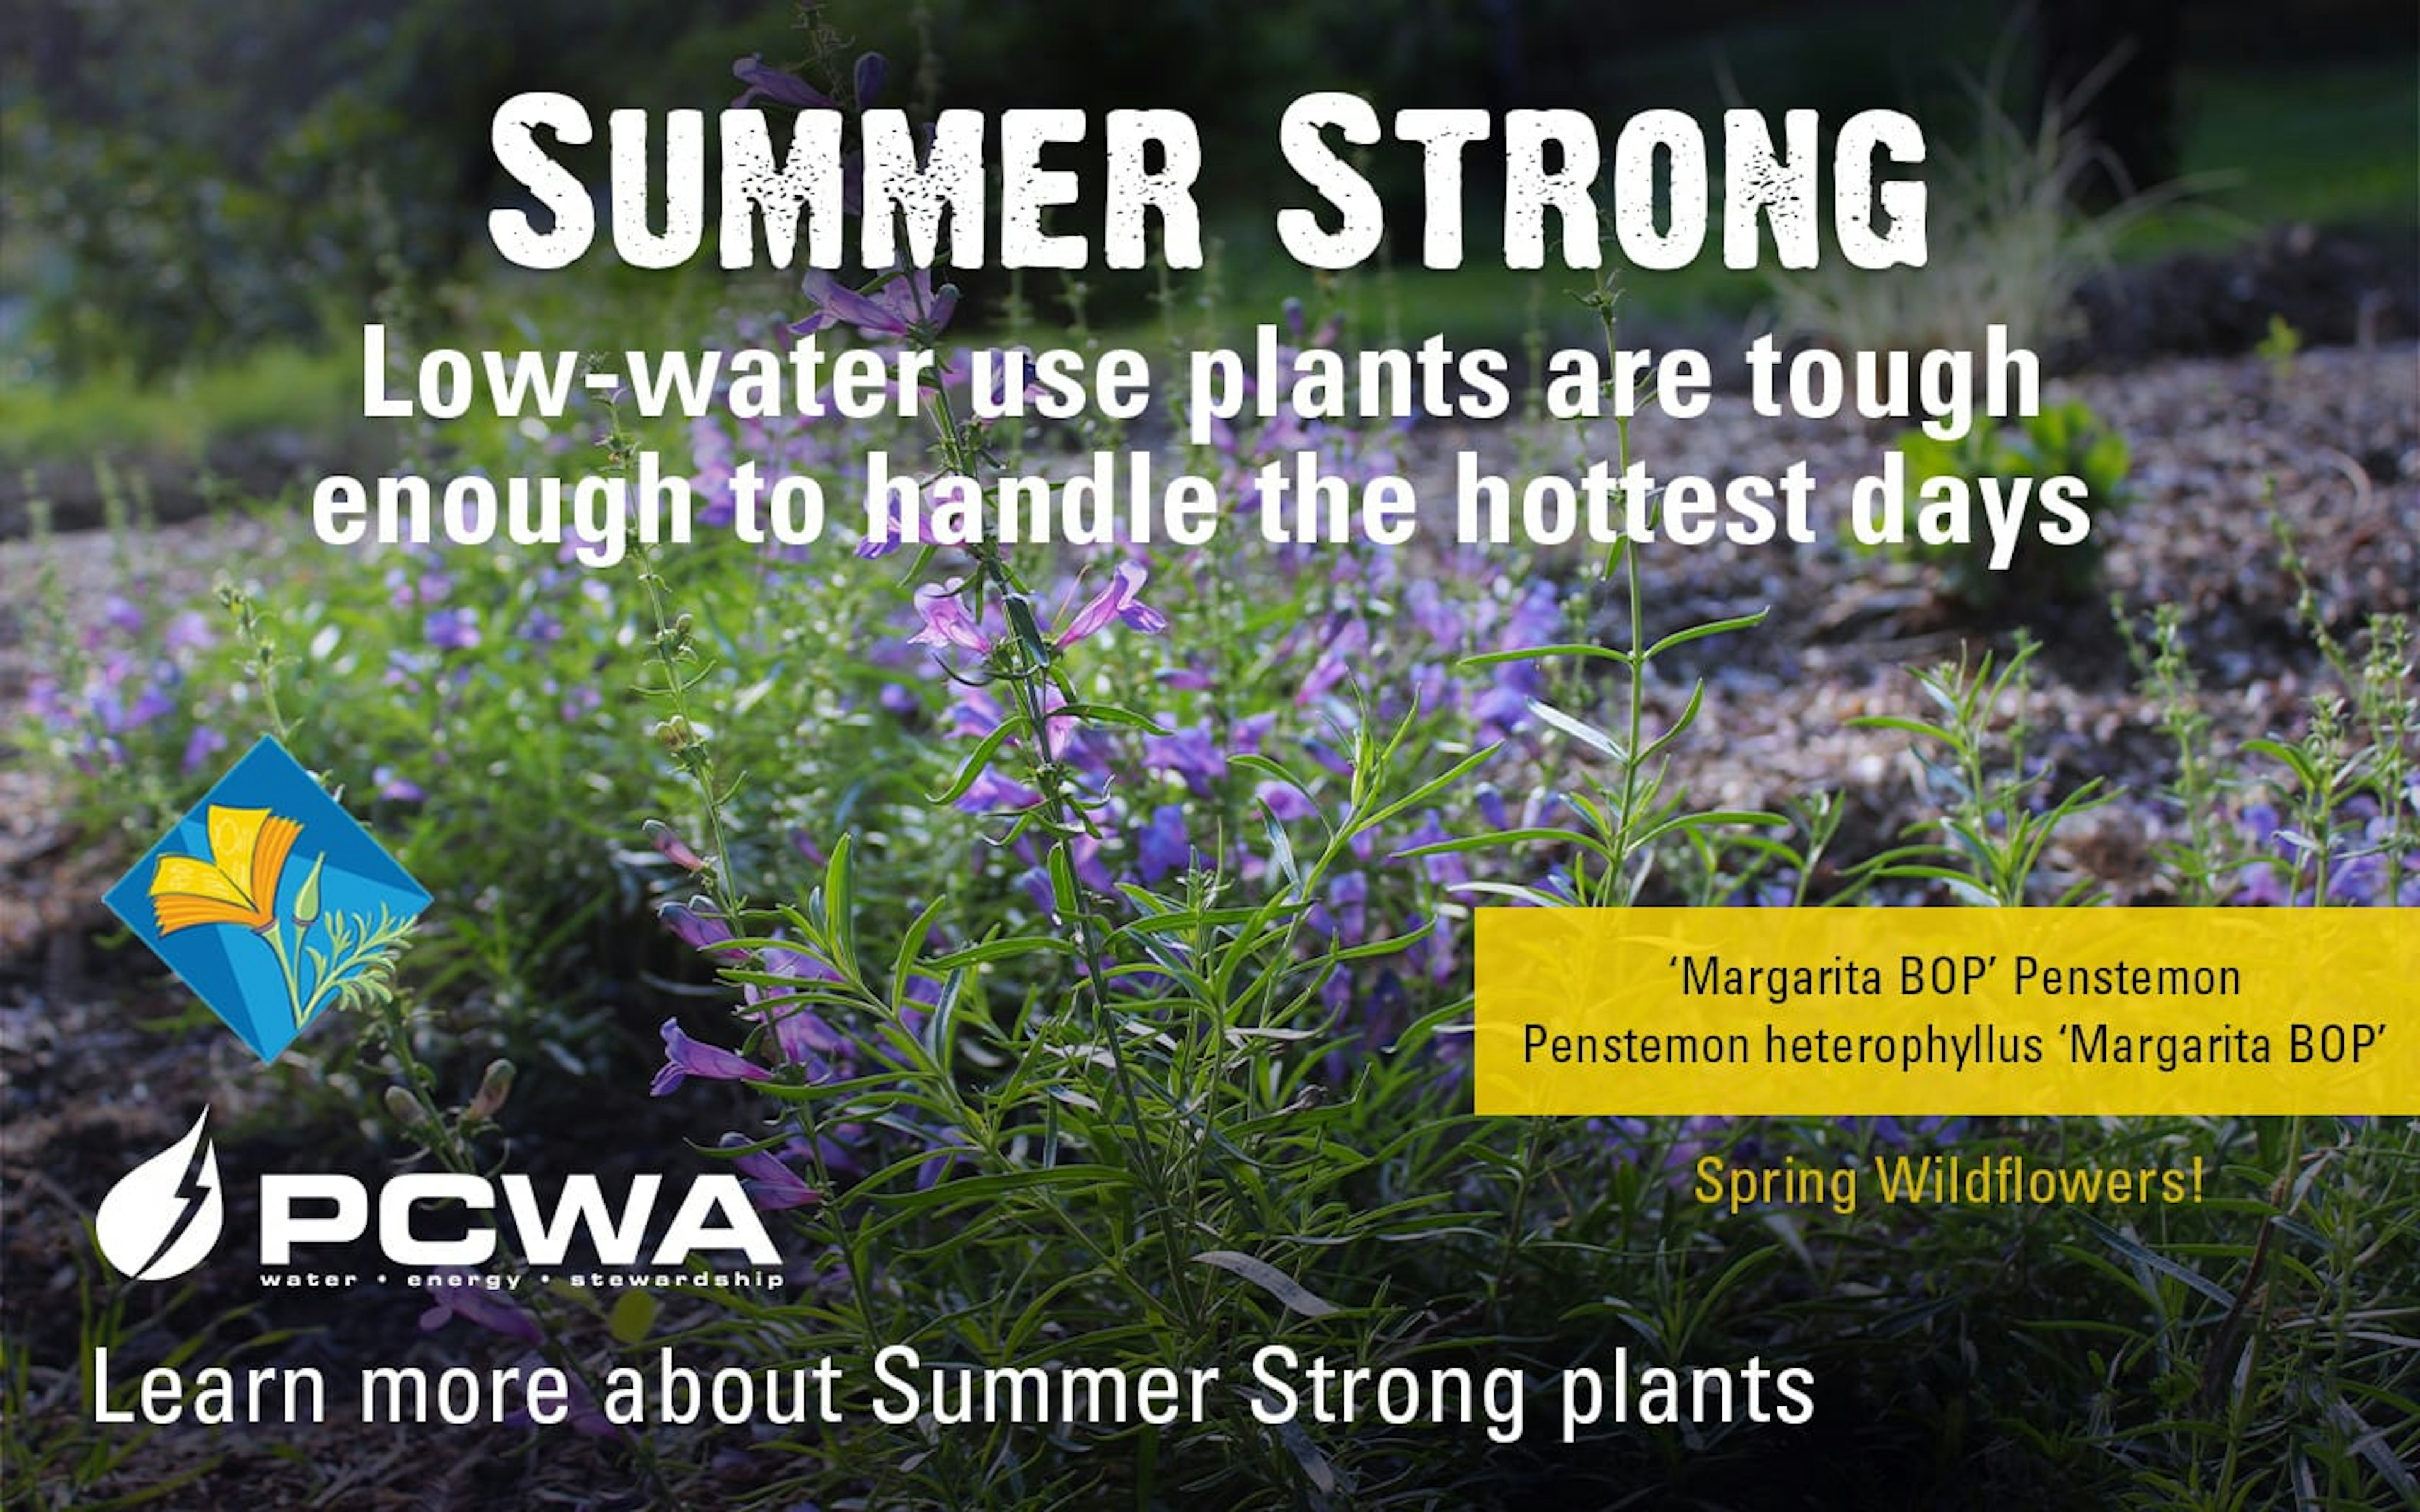 Margarita BOP Penstemon, Summer Strong Low-Water Use Plant of the Month